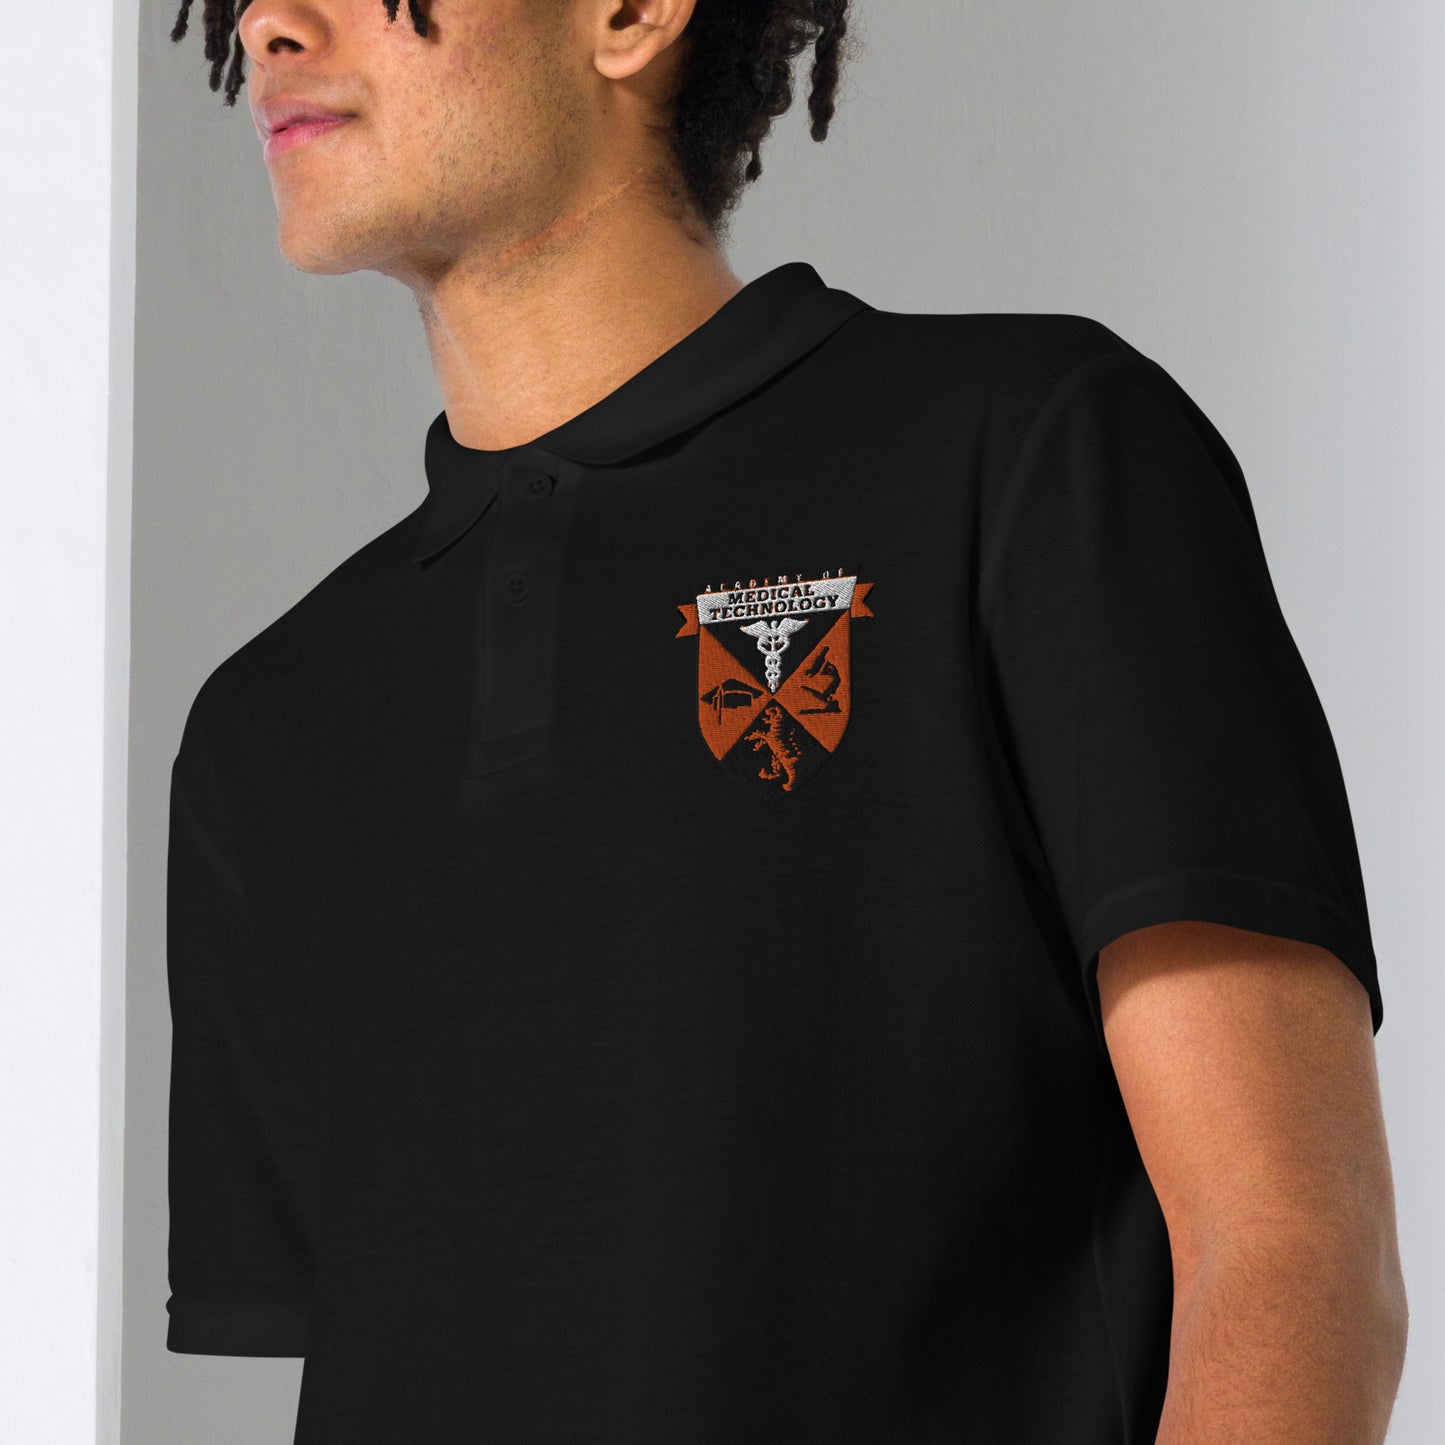 Academy Of Medical Technology Embroidered Polo Shirt